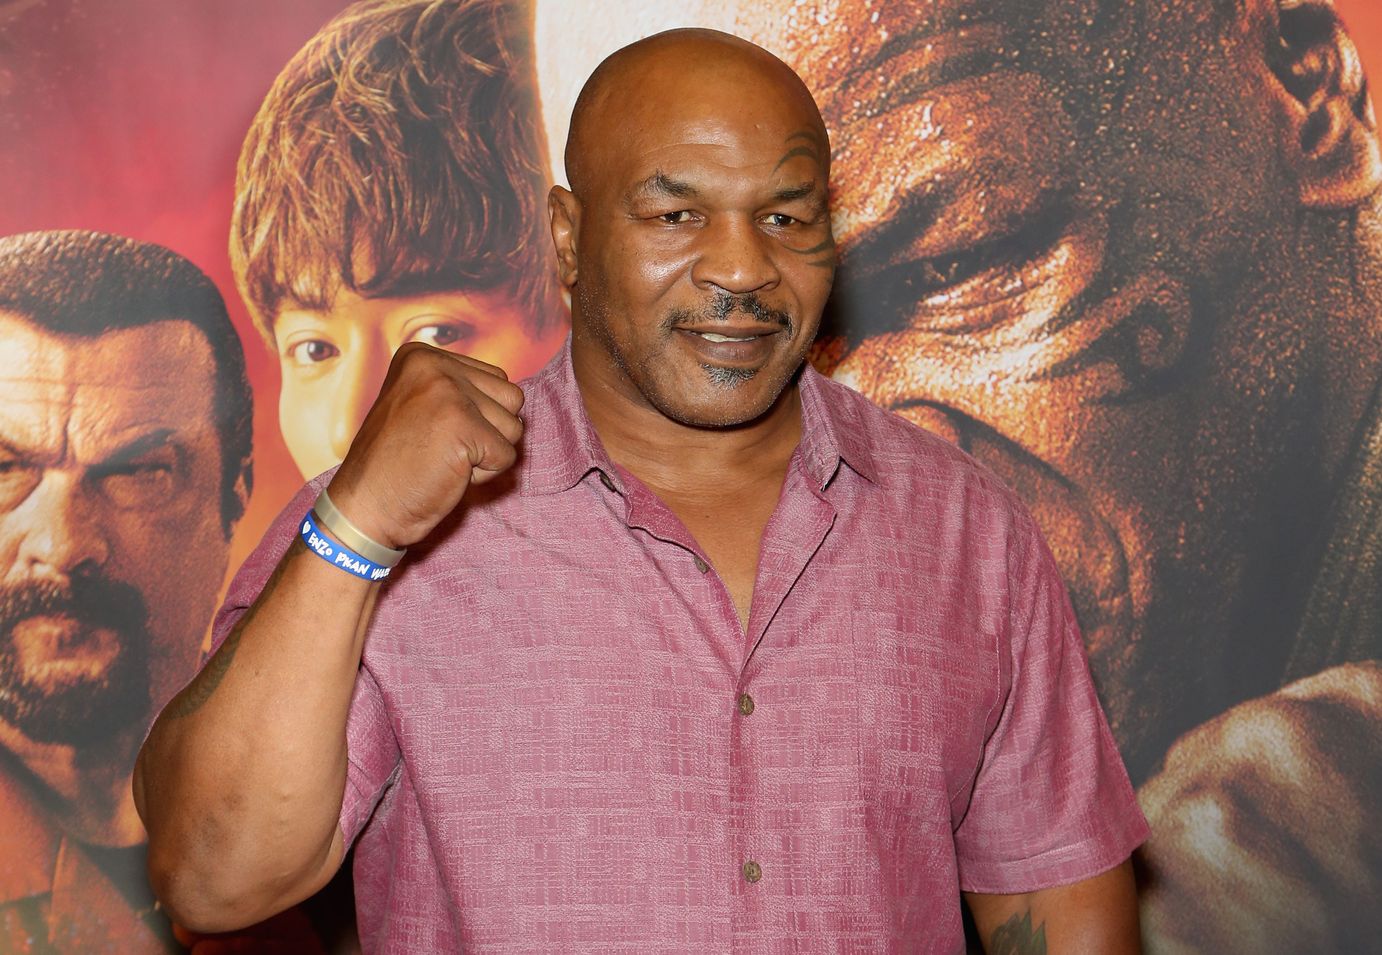 Actor and former boxer Mike Tyson attends the world premiere of the movie "China Salesman" at the Cannery Casino Hotel on June 15, 2018 in North Las Vegas, Nevada. (Photo by Gabe Ginsberg/Getty Images)